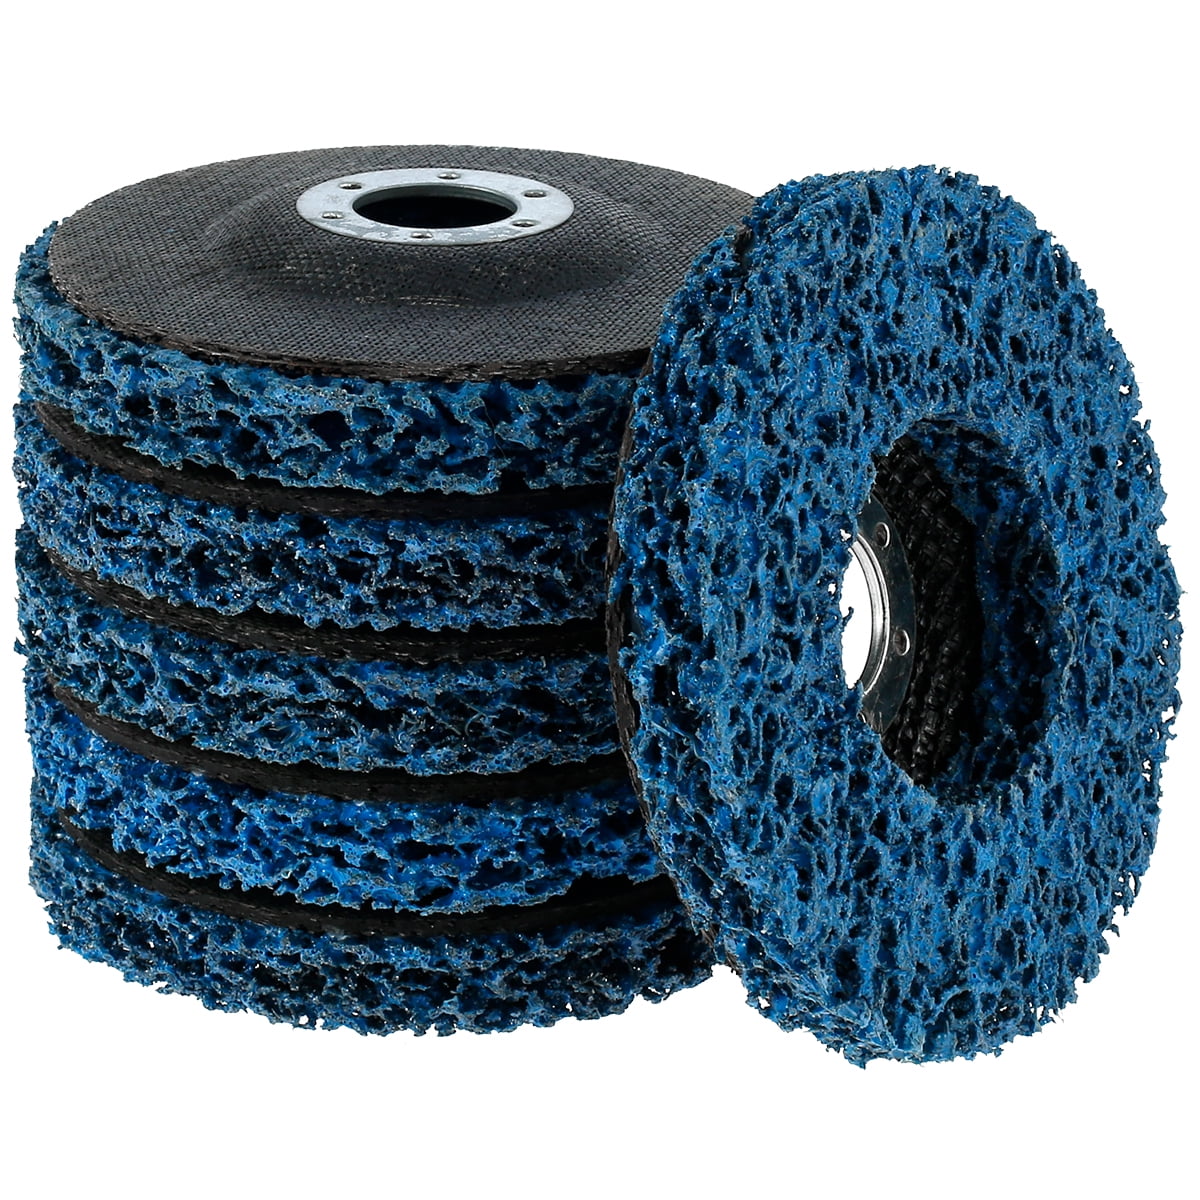 Blue 115mm Poly Strip Wheel Nylon Rust Paint Removal Clean For Angle Grinder 